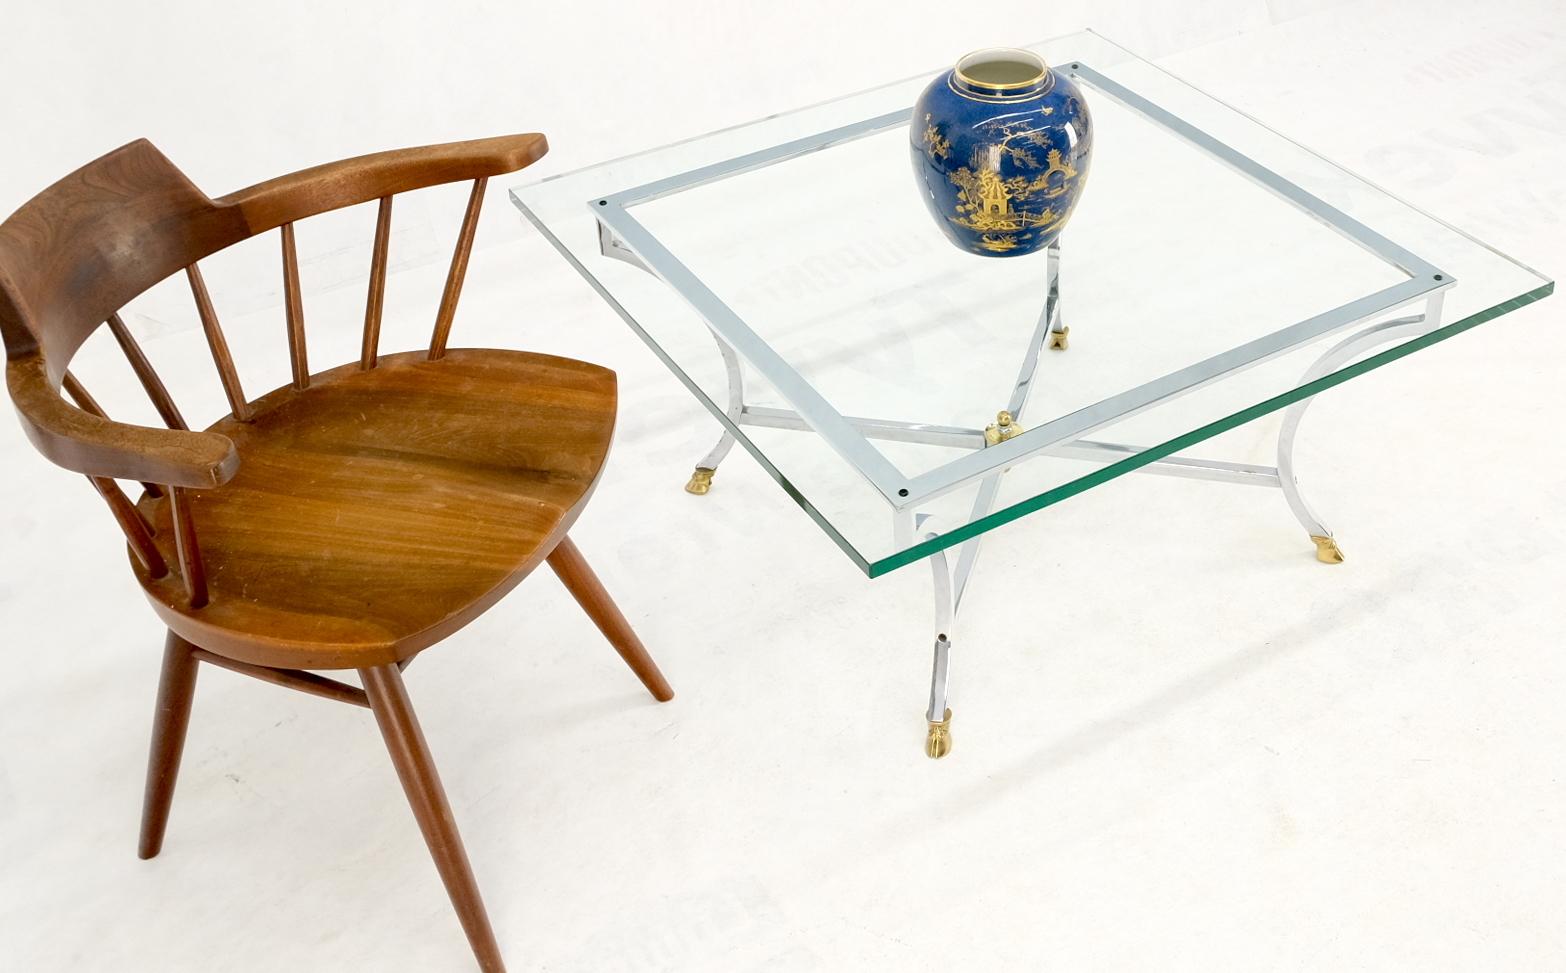 Brass Hoof Feet Polished Chrome Glass Top Square Coffee Table Mid-Century Modern In Good Condition For Sale In Rockaway, NJ